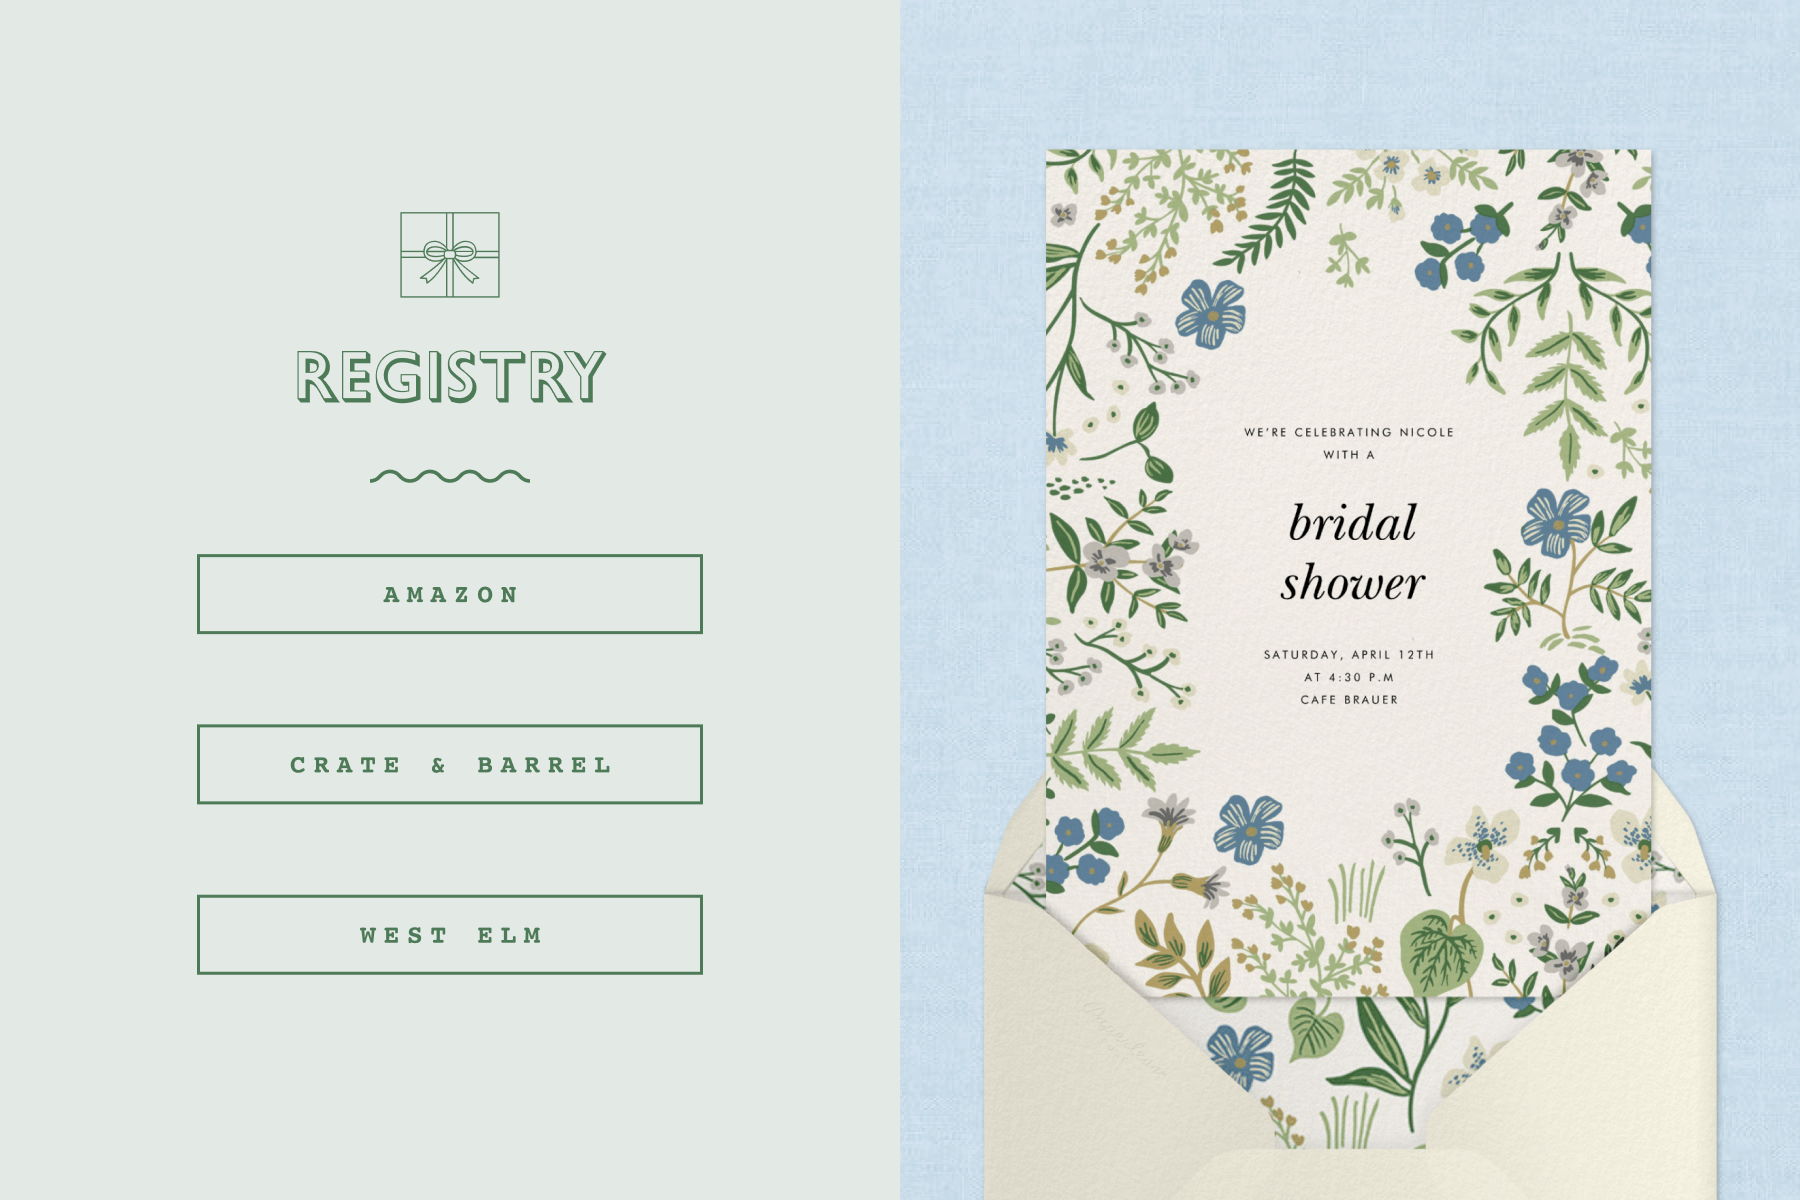 Left: A Registry Block showing three clickable links to registries; Right: A blue floral bridal shower invitations.